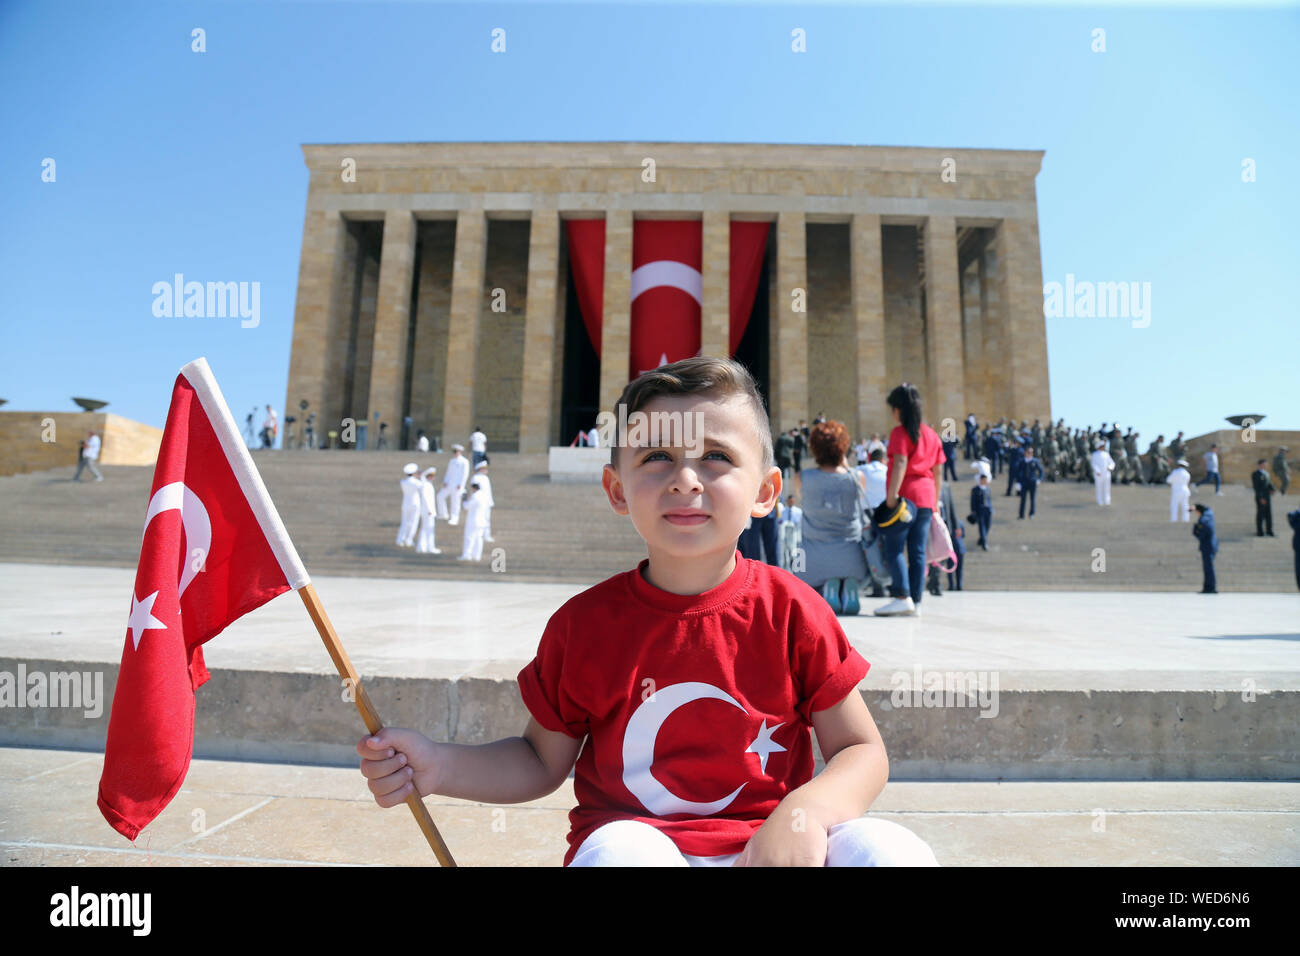 Ankara, Turkey. 30th Aug, 2019. A Turkish kid celebrates the 97th anniversary of Victory Day at the Ataturk Mausoleum in Ankara, Turkey, Aug. 30, 2019. Turkey marked on Friday the 97th anniversary of Victory Day, the day the Turks defeated the Greek forces at the Battle of Dumlupinar, the final battle of the Turkish War of Independence in 1922. Credit: Mustafa Kaya/Xinhua Credit: Xinhua/Alamy Live News Stock Photo